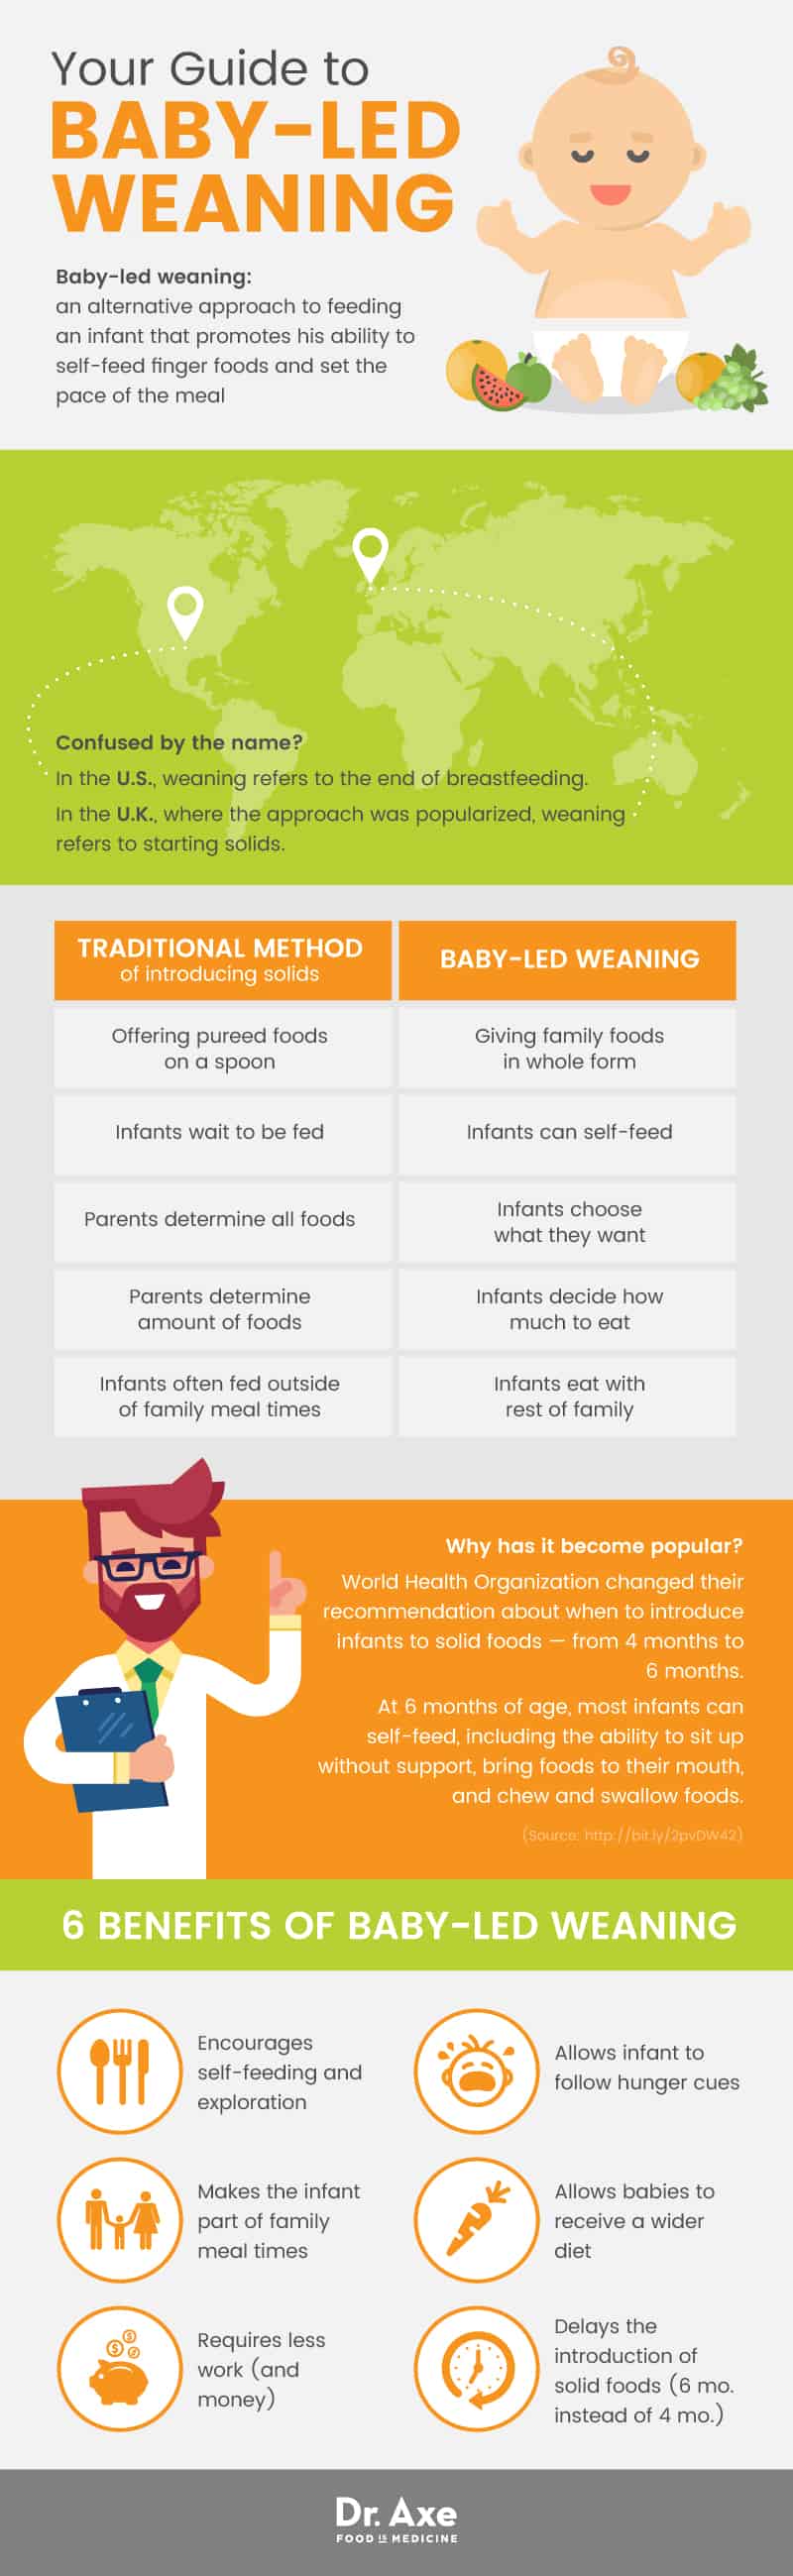 Guide to baby-led weaning - Dr. Axe